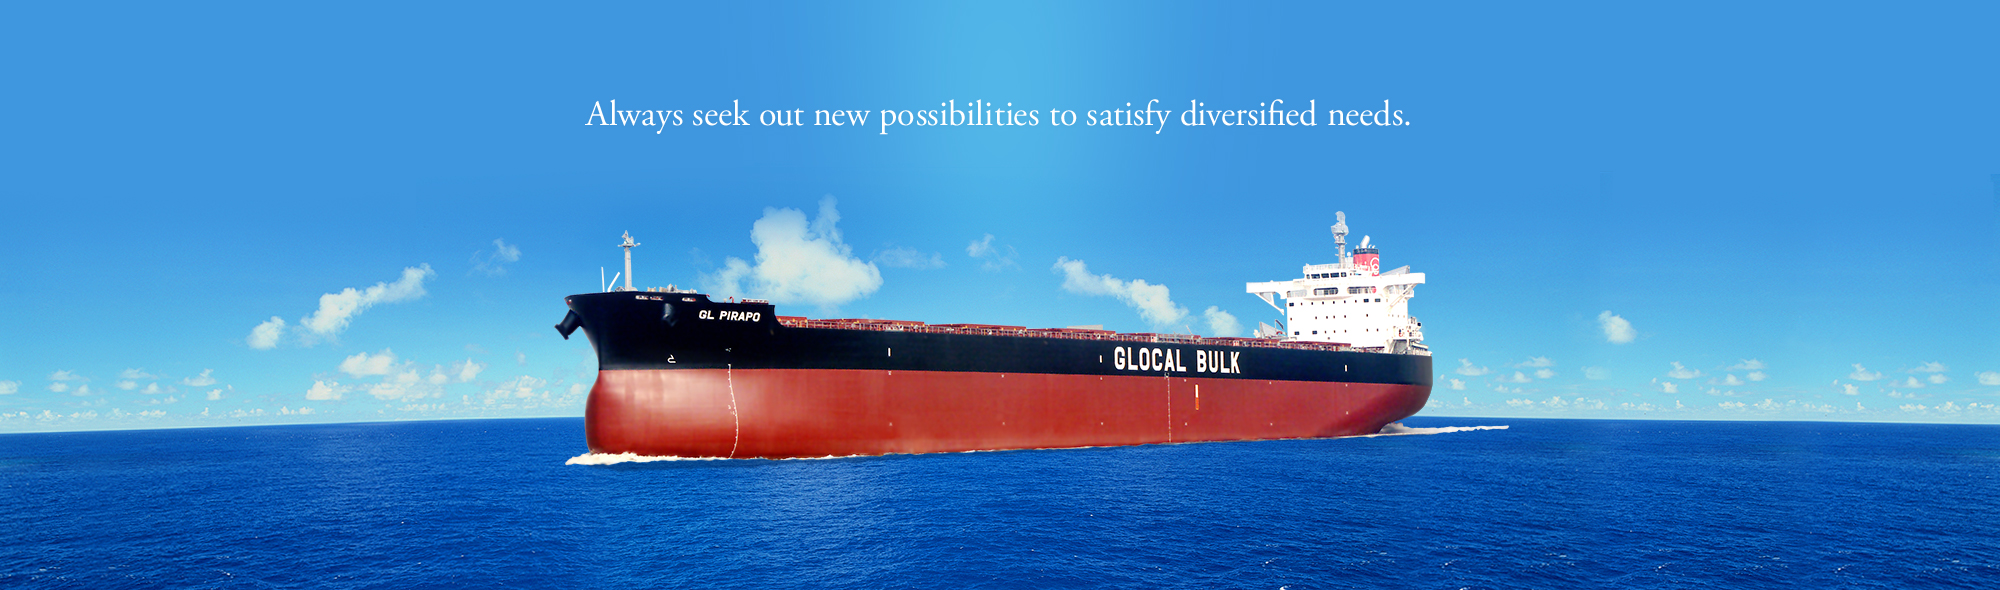 Always seek out new possibilities to satisfy diversified needs.